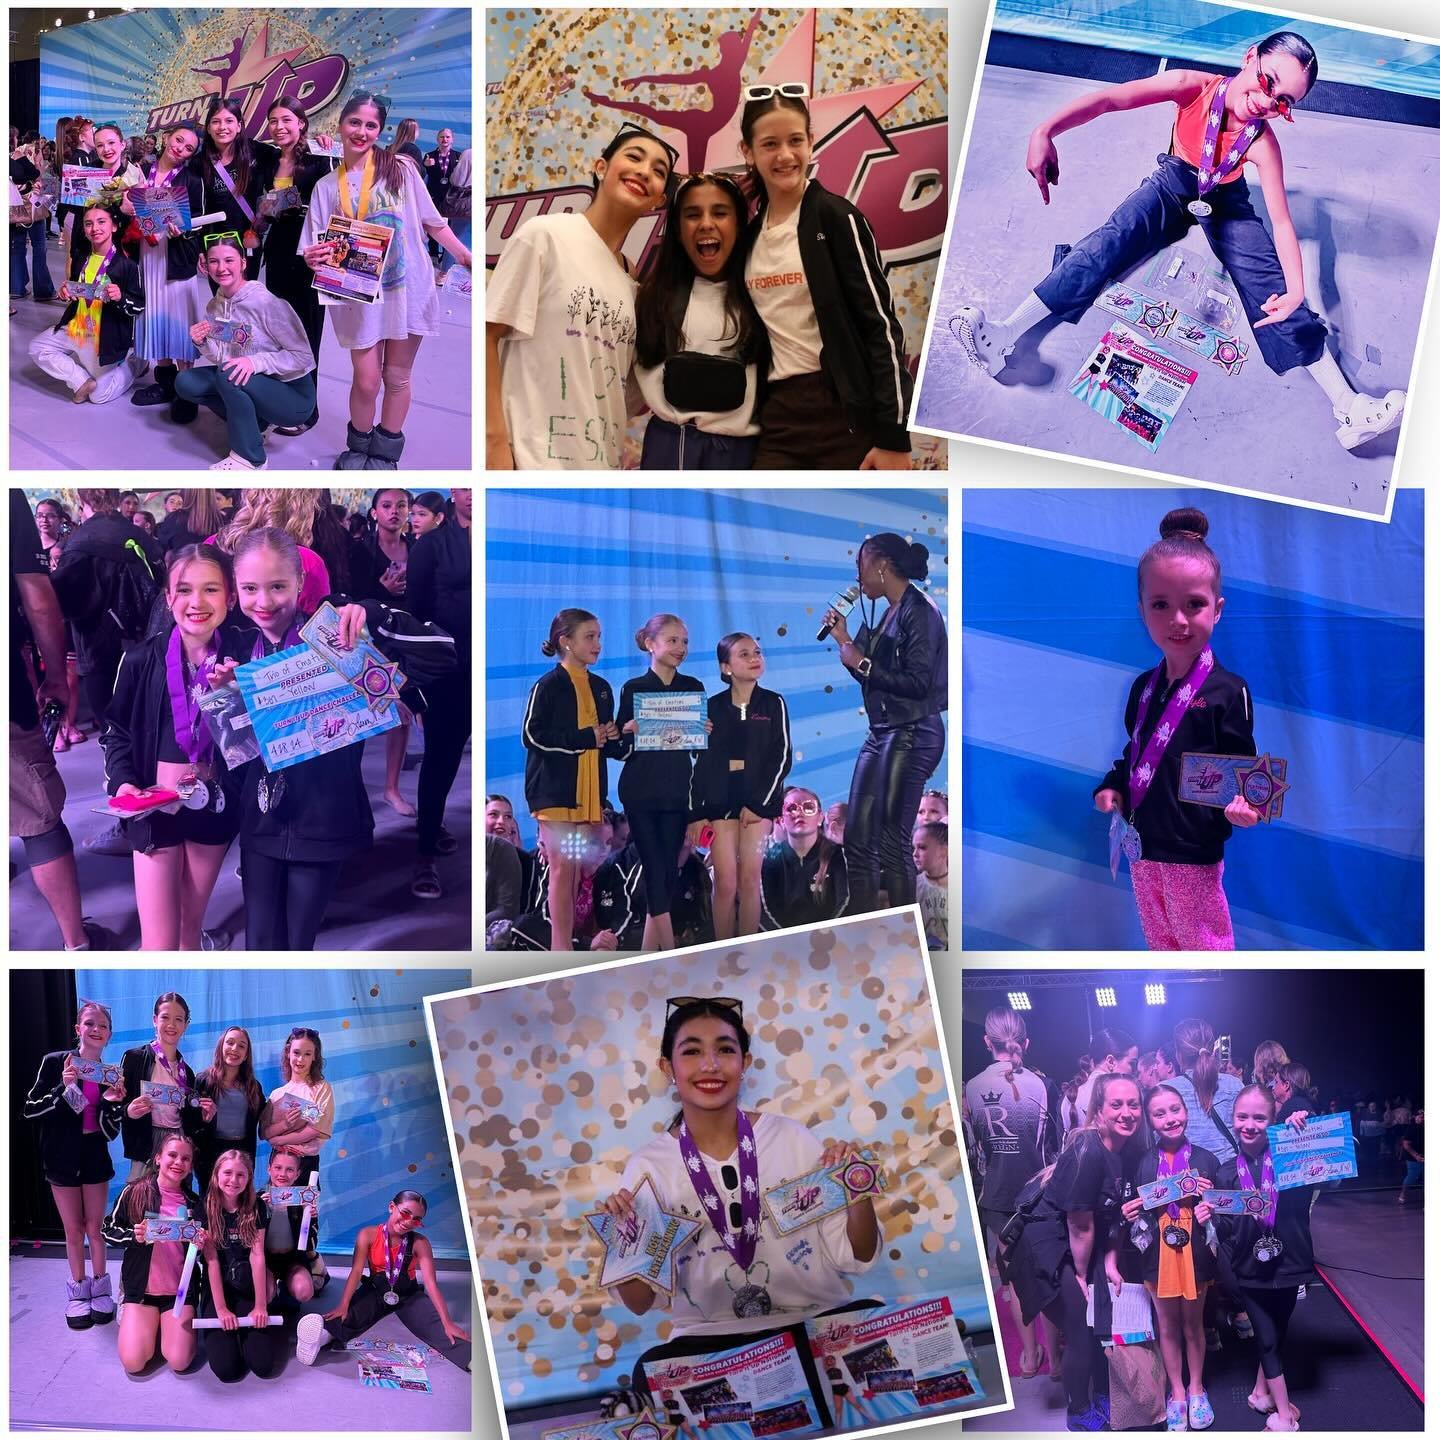 We are so proud of our ADS Company Stars who performed @turnitupdance last weekend! 💜🩵🩷

#passionartistrydance #discovertheartistwithin #allendancestudio #mckinneydancestudio #friscodancestudio #thedancestudionetwork